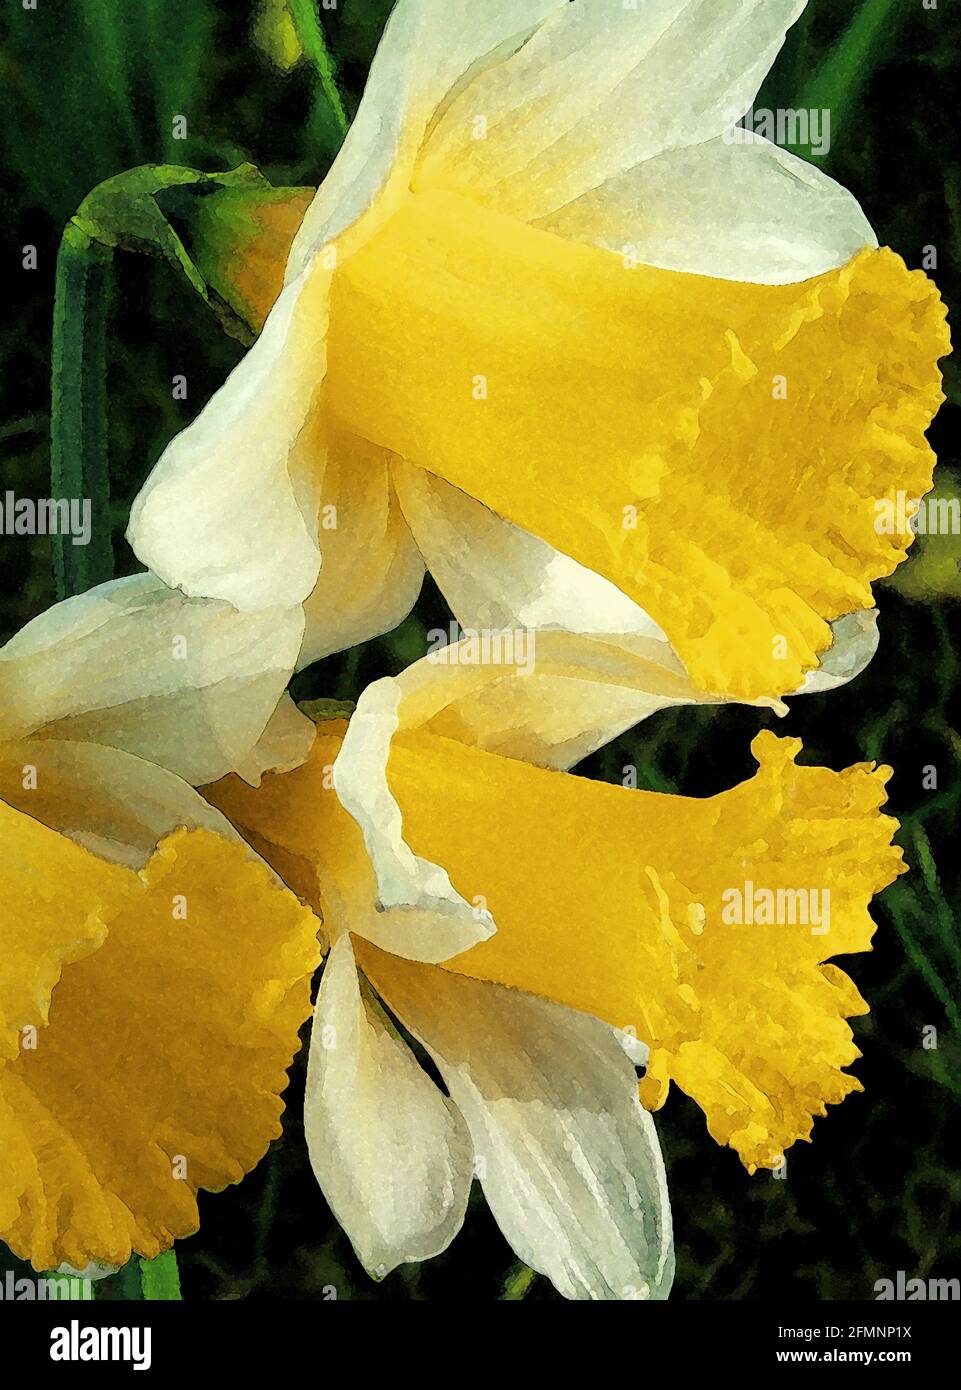 Daffodil (Narcissus 'February Silver') One of Forty-two Iconic Images of English Garden Flowers, Wildflowers and Rural Landscapes. Stock Photo